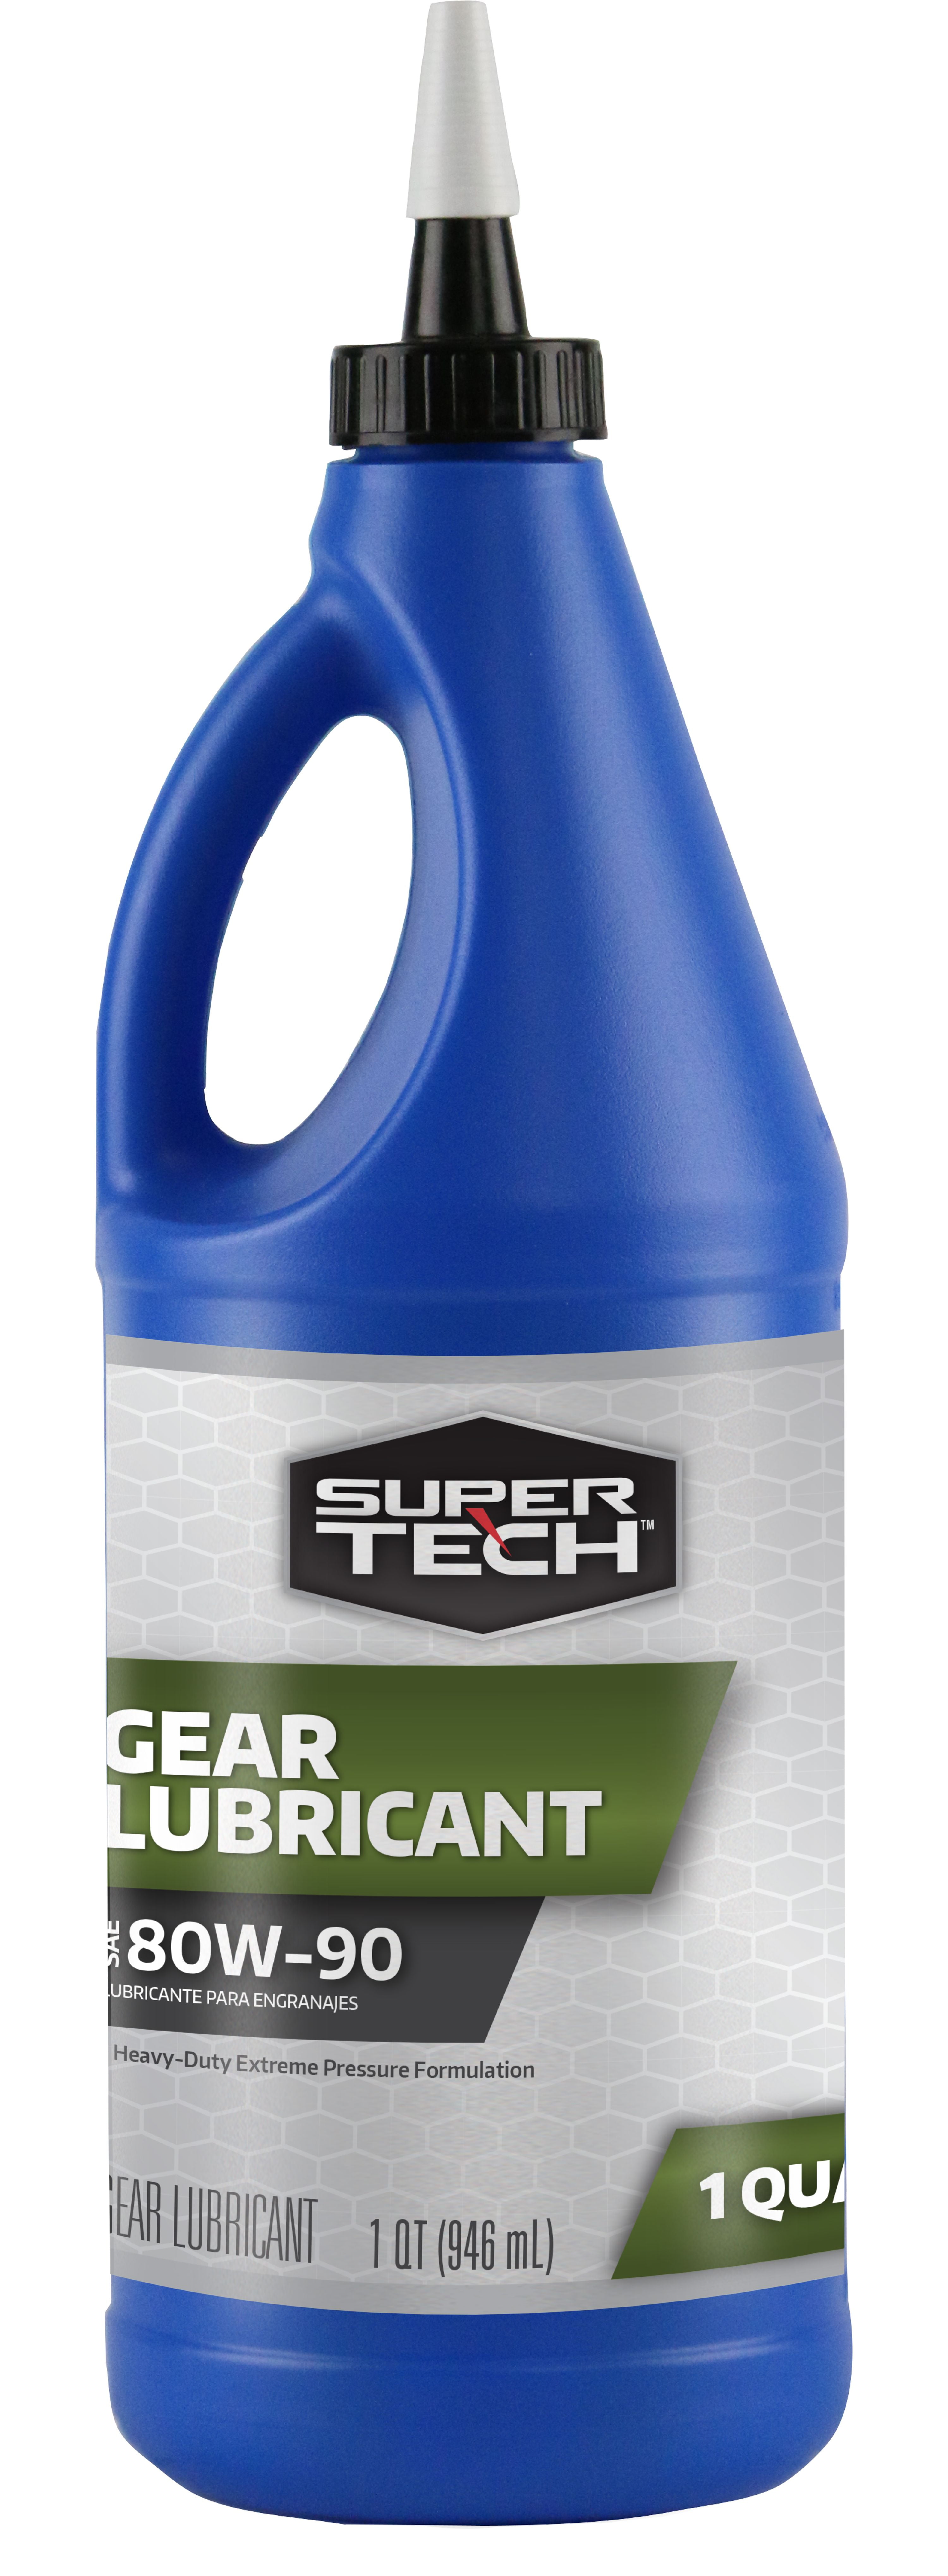 Super Tech Gear Lubricant SAE 80W-90, 1 Quart - Walmart.com How To Get Gear Oil Out Of Clothes